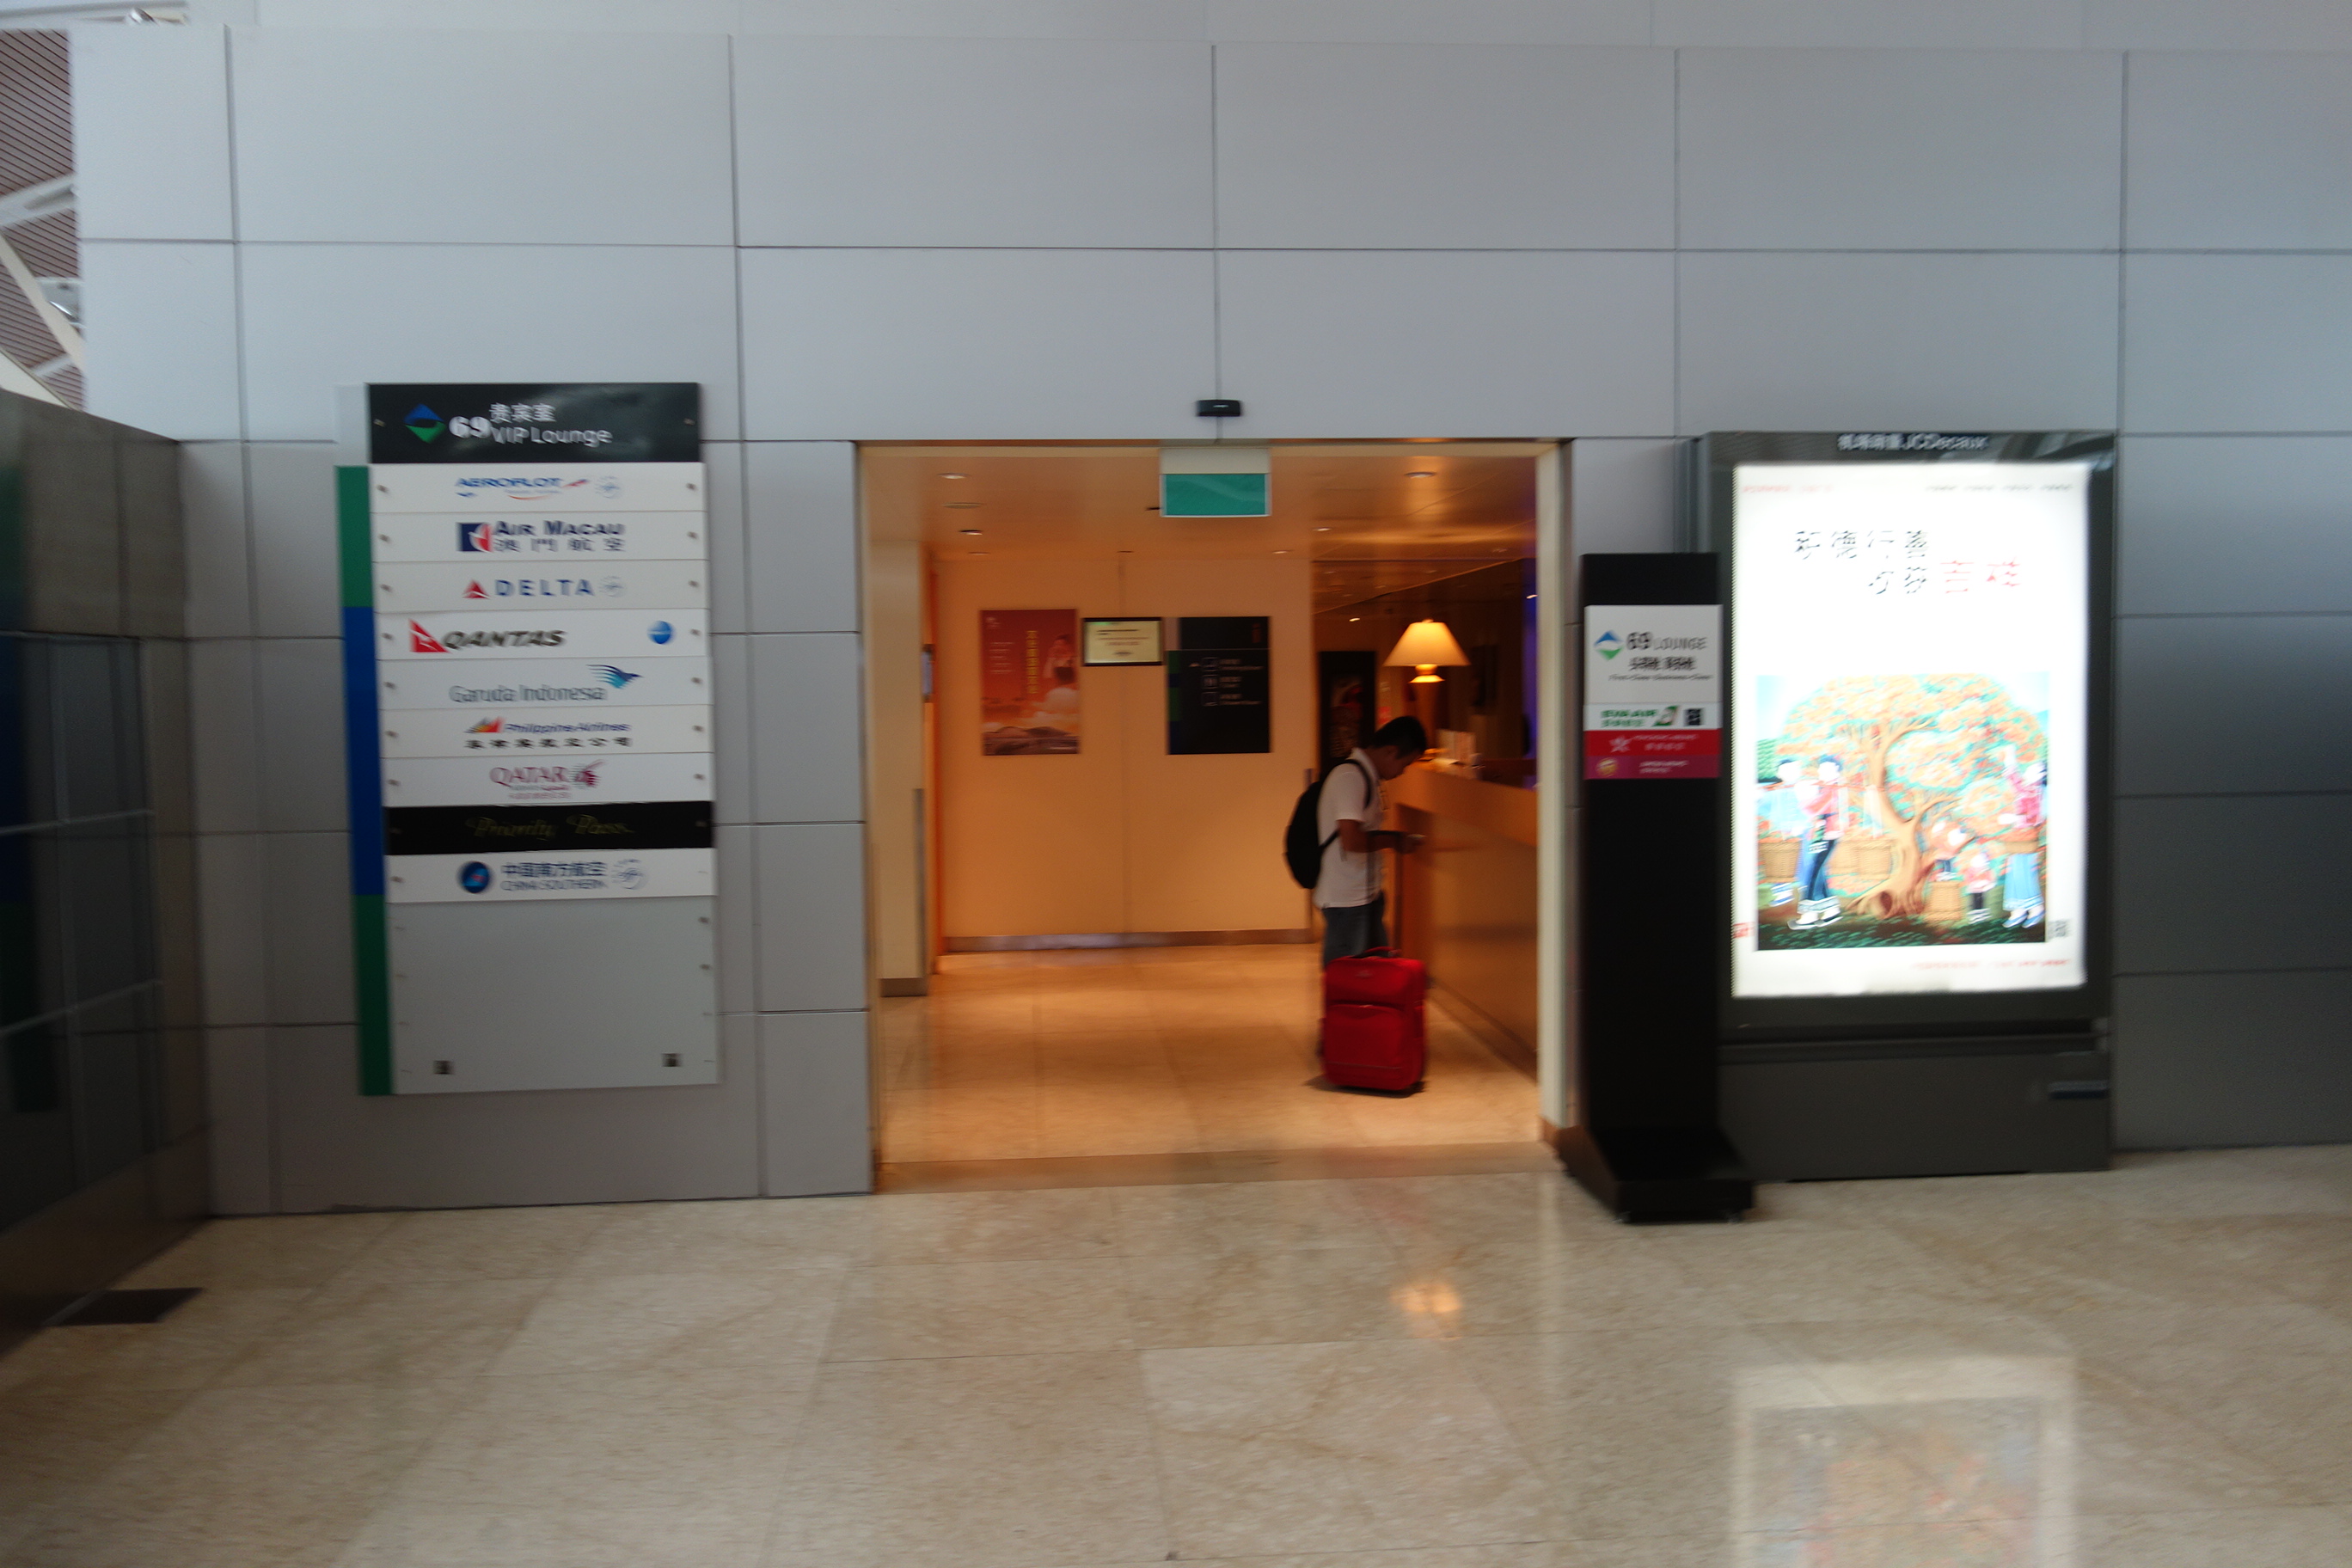 Entrance to the lounge that I chose, No. 69 (right beside the Cathay Pacific lounge)